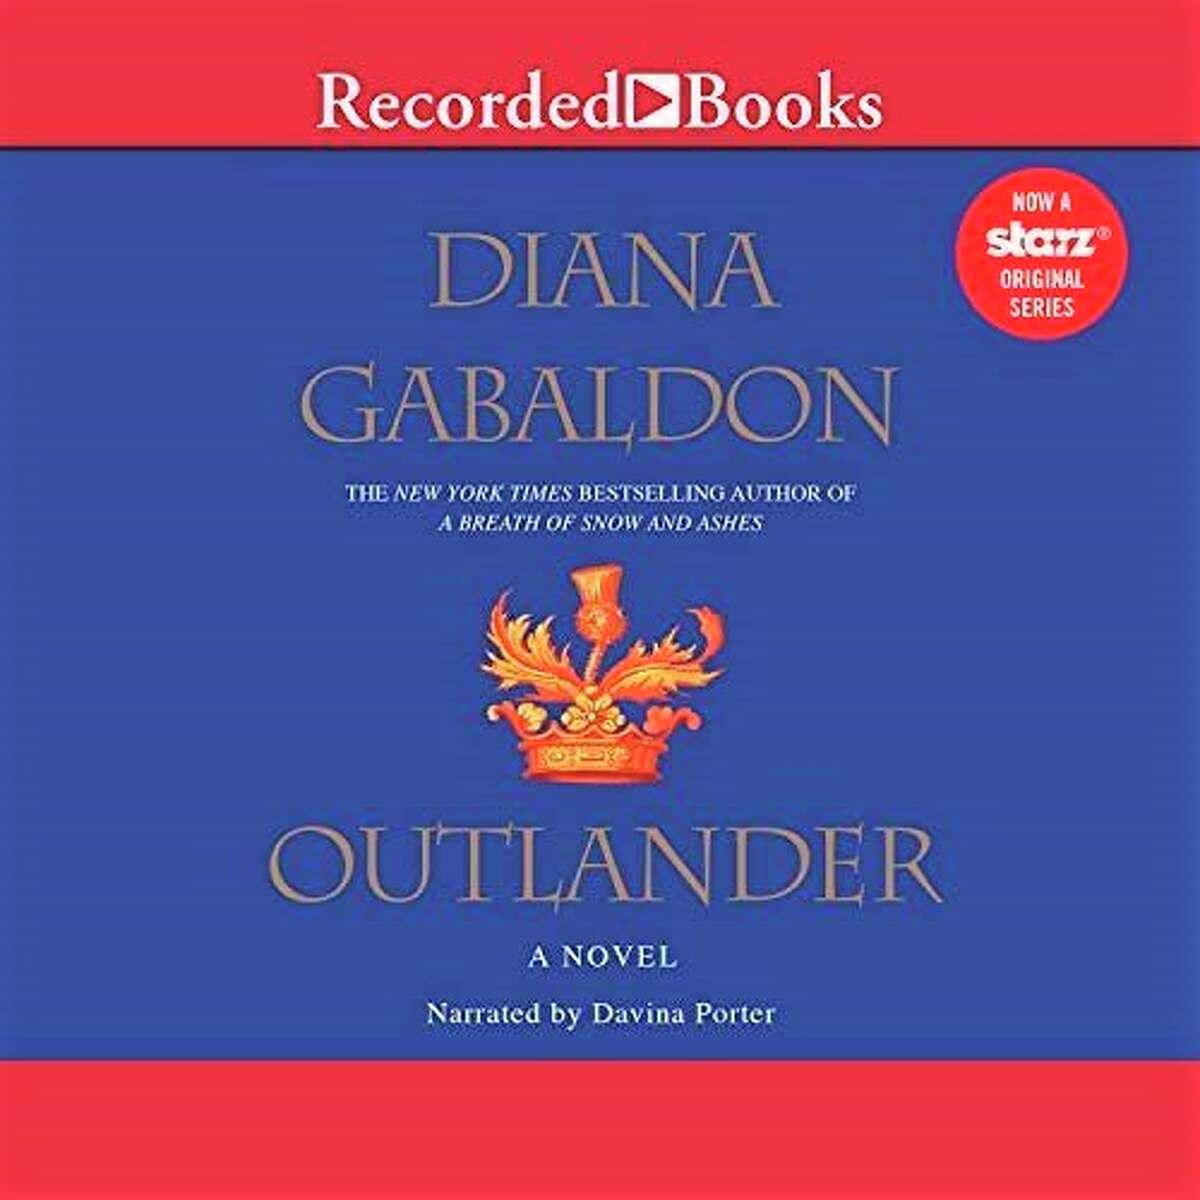 "Outlander" by Diana Gabaldon is set in Scotland. A woman time travels between 1945 and the Clan Wars of the 1700s. She finds love in both places while navigating history as it's being made. Book one in the "Outlander" series was made into a television show.